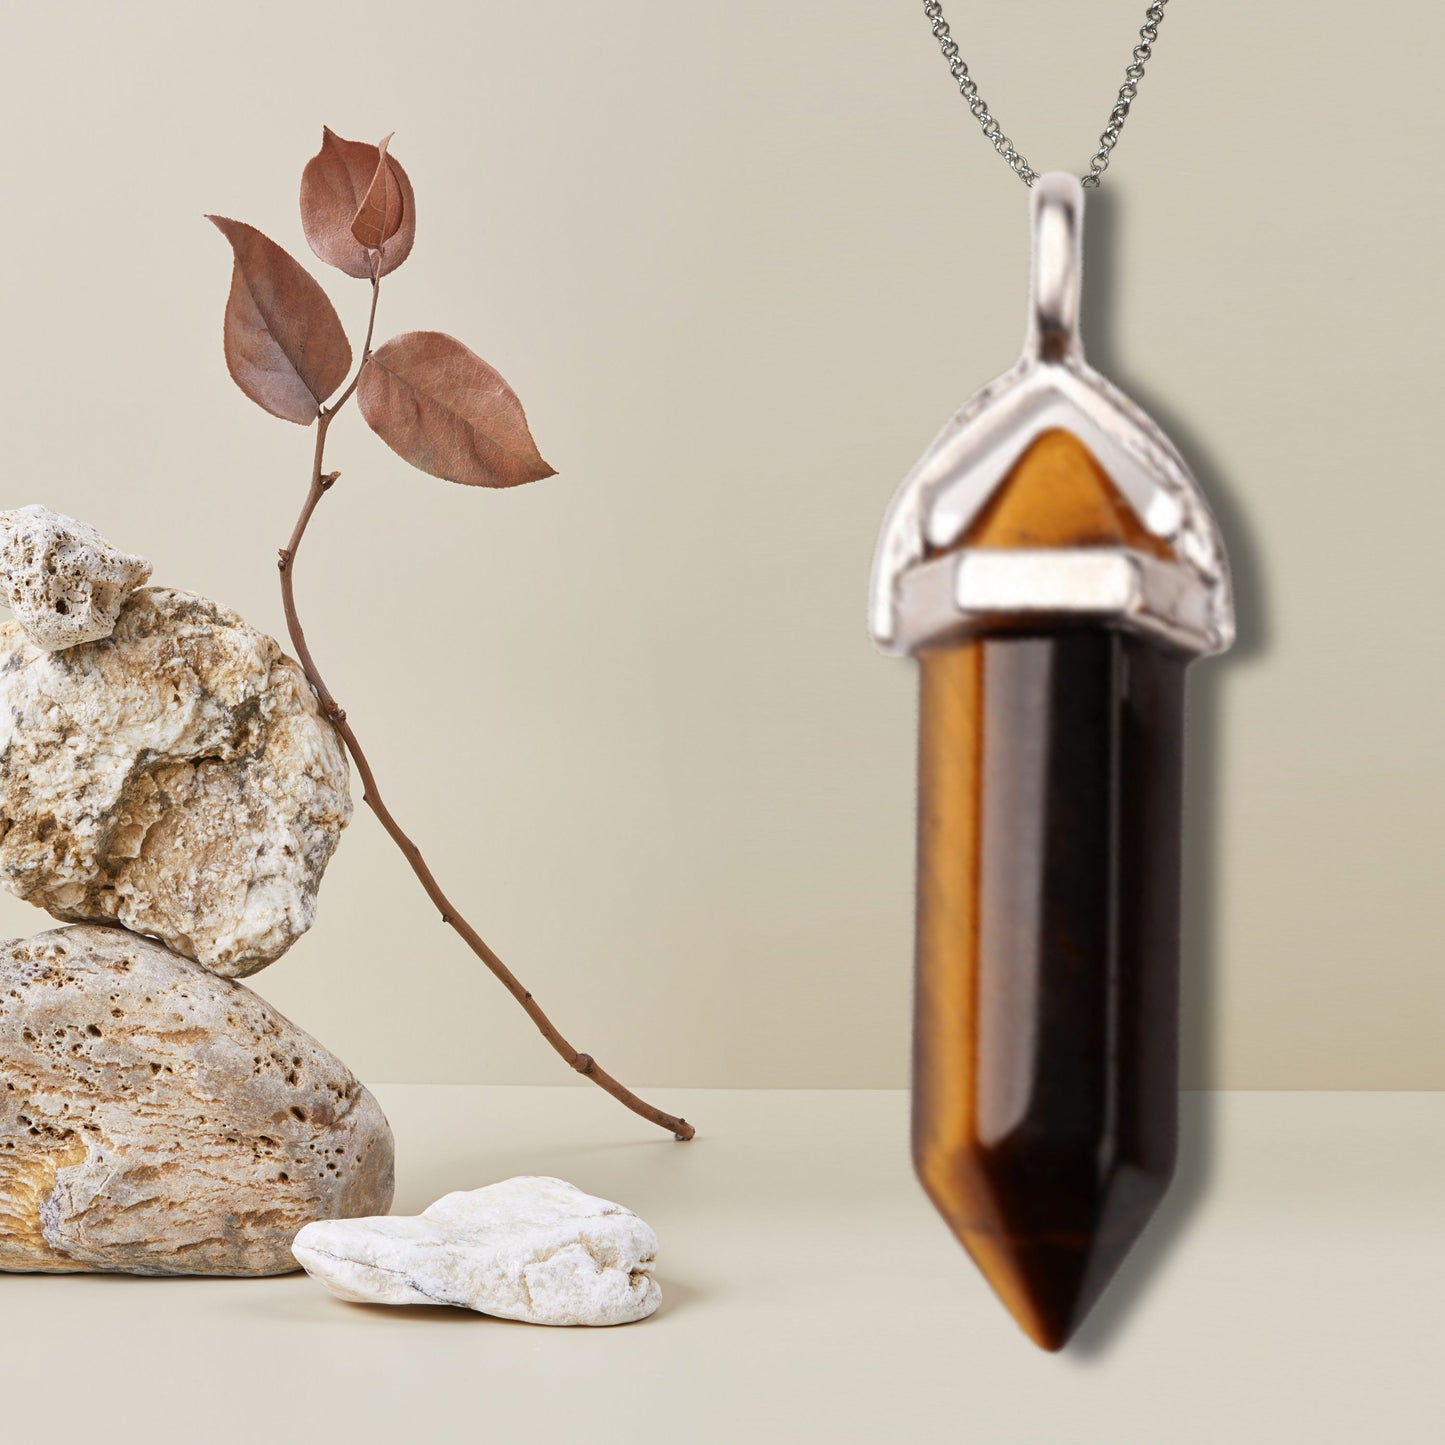 Natural Healing Tiger's Eye Silver Plated Necklace